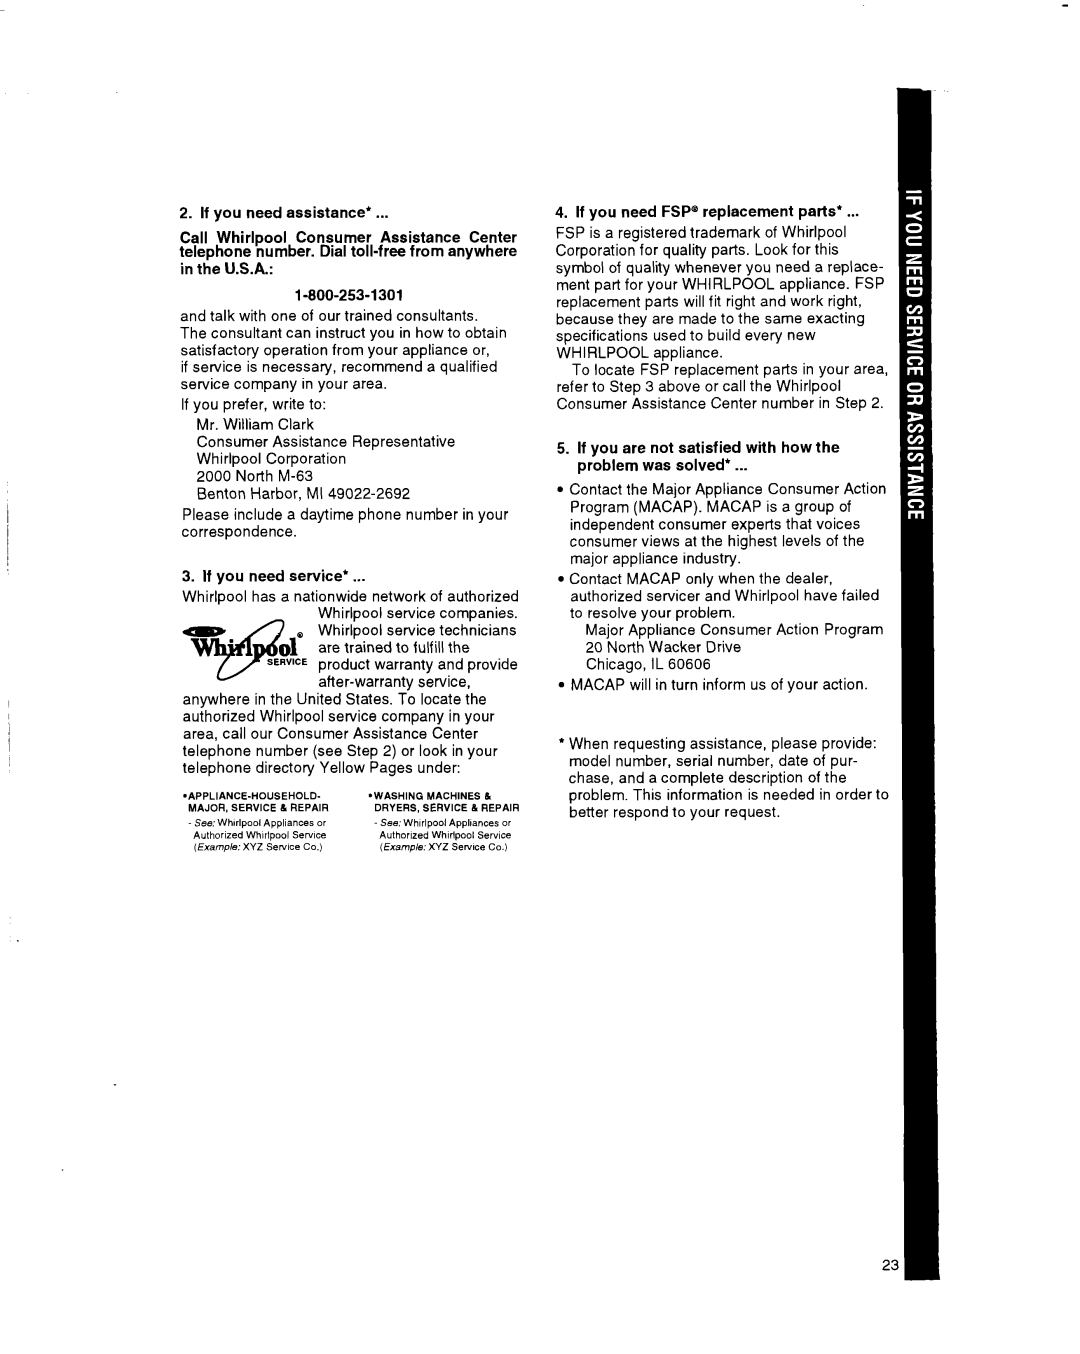 Whirlpool SF514OEY manual If you need assistance’ 